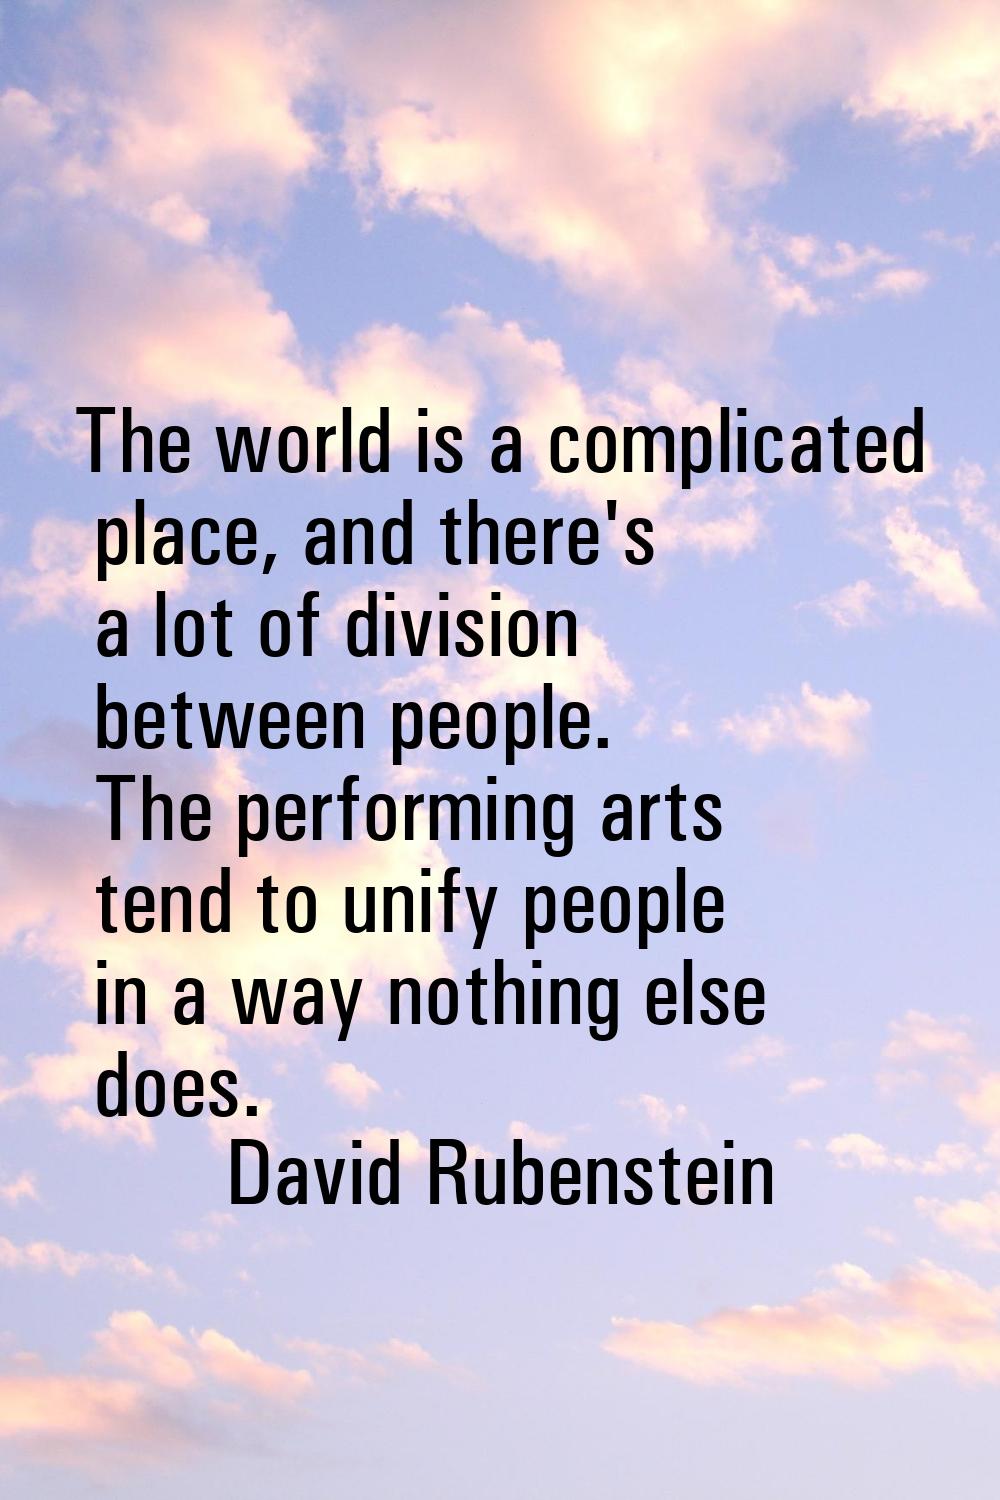 The world is a complicated place, and there's a lot of division between people. The performing arts